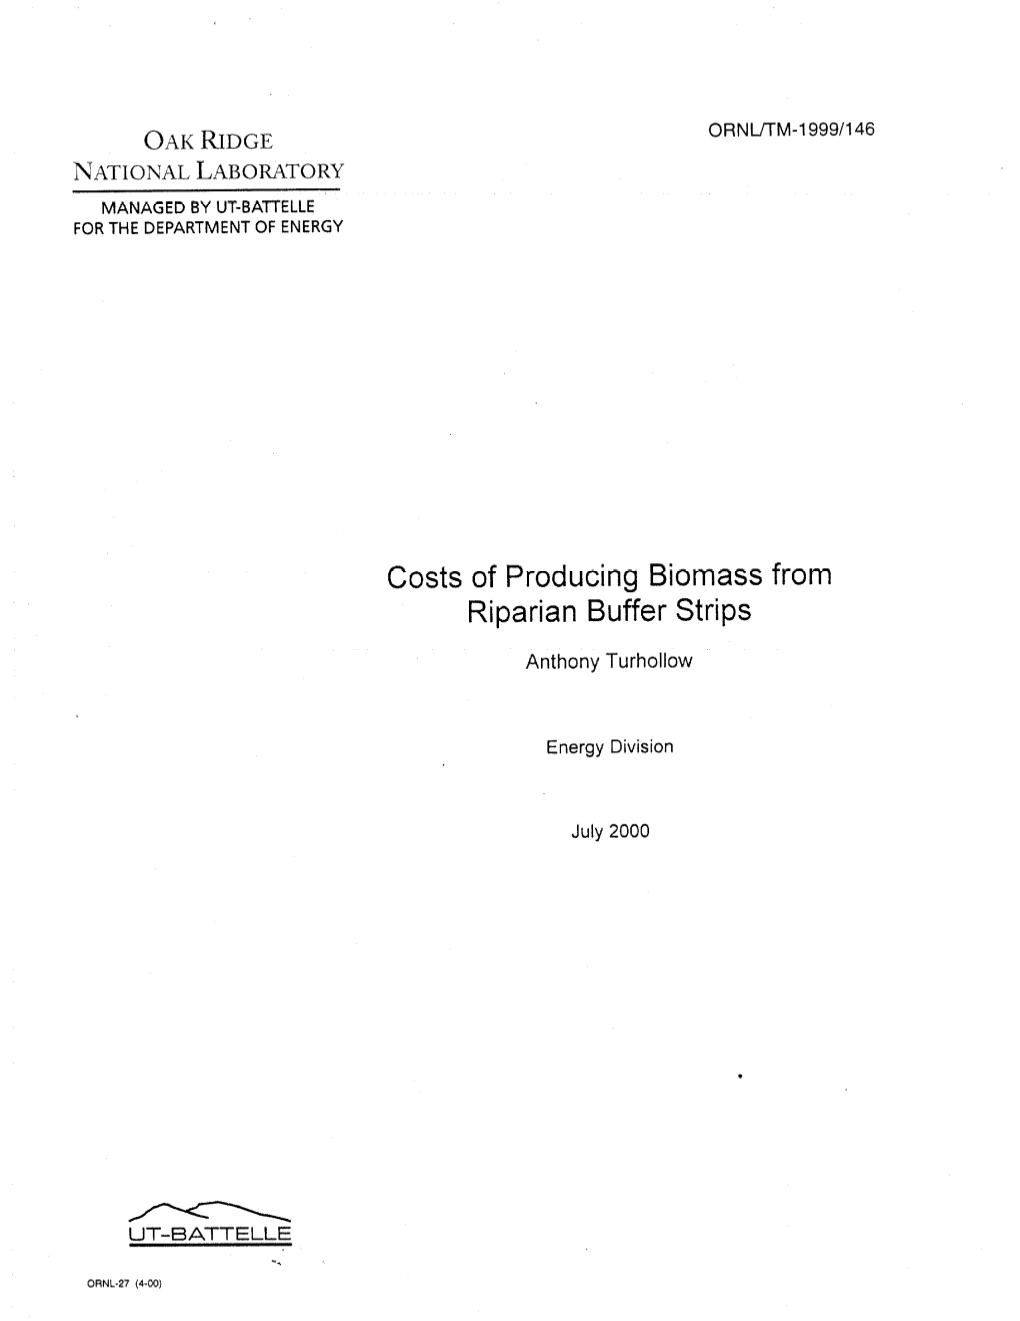 Costs of Producing Biomass from Riparian Buffer Strips